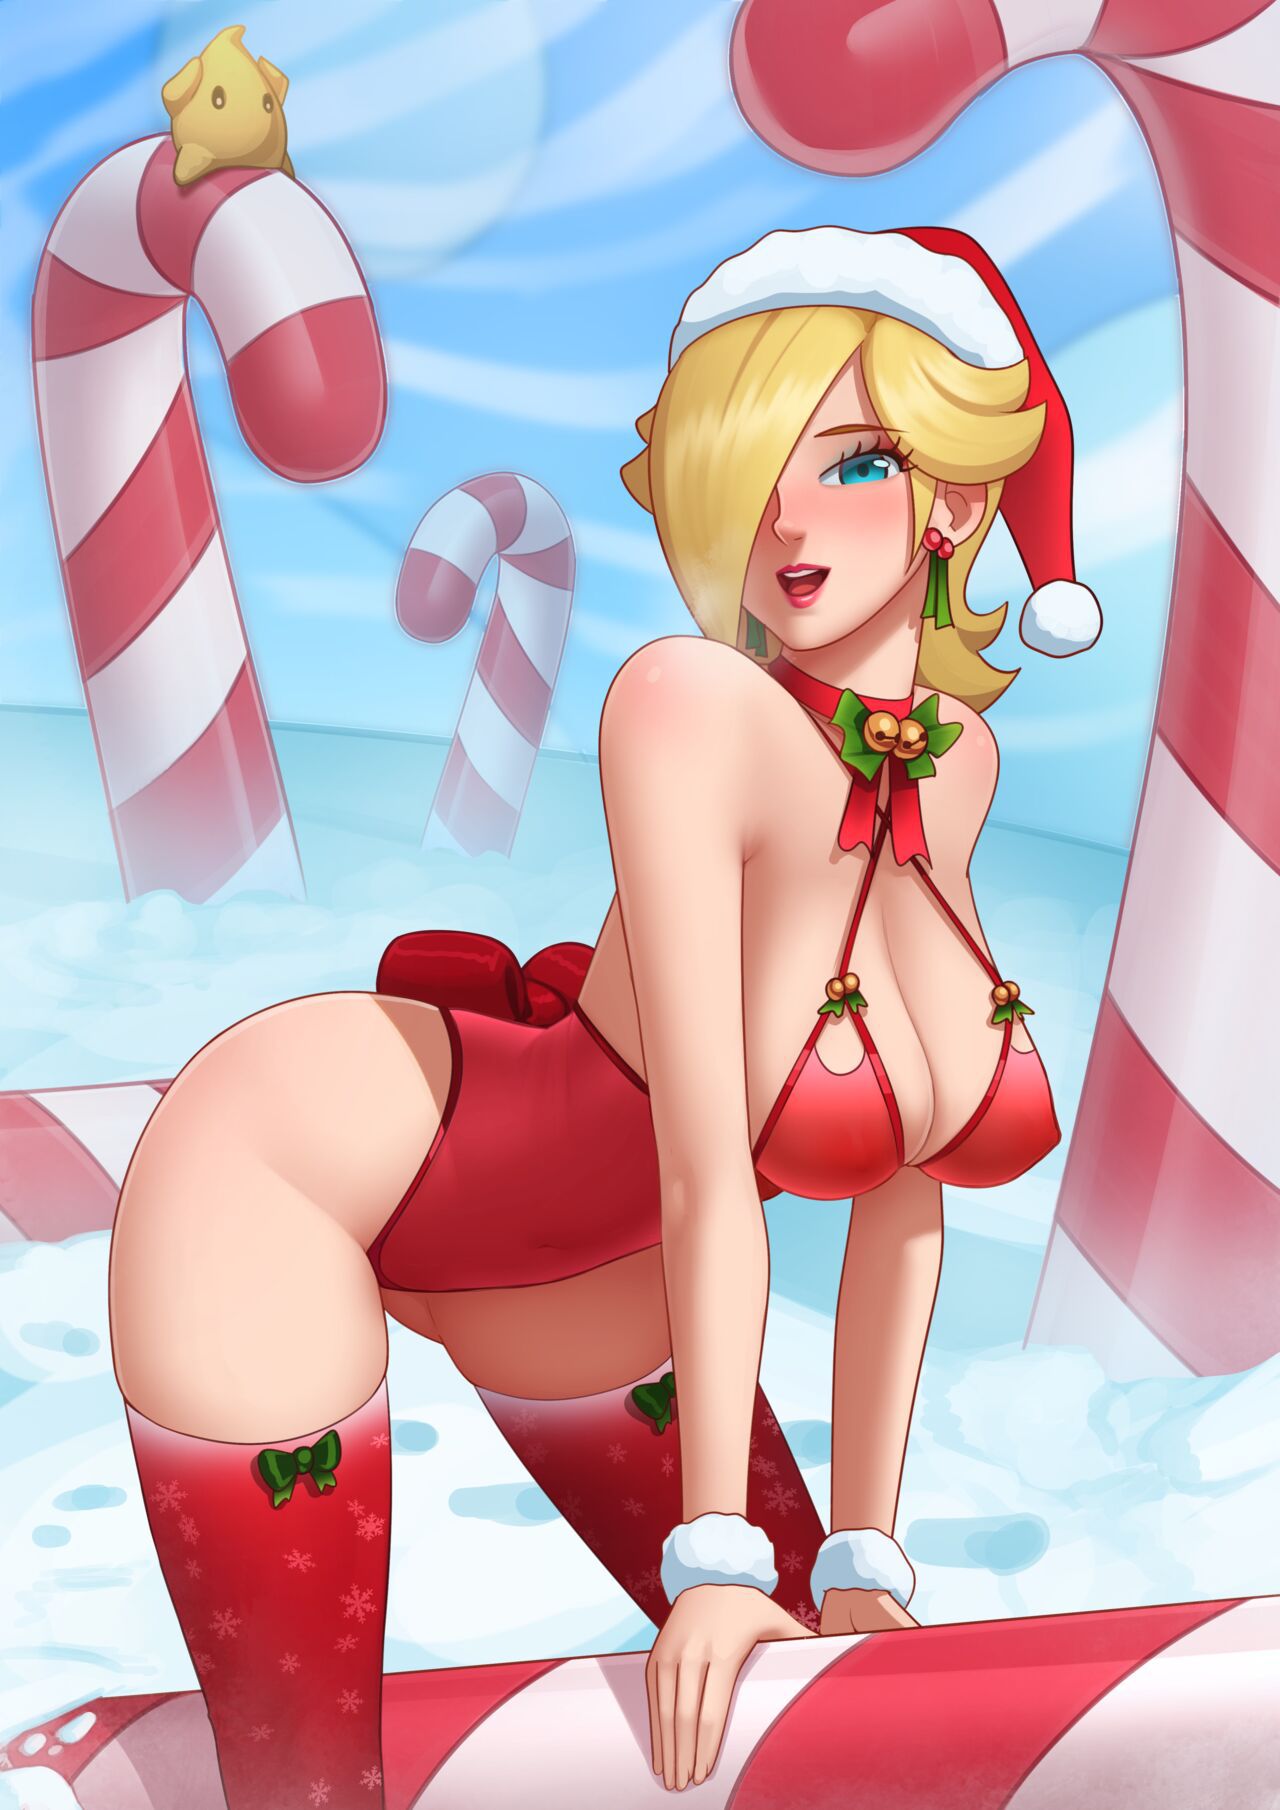 [Deilan12] Candy Canes Appeared 8